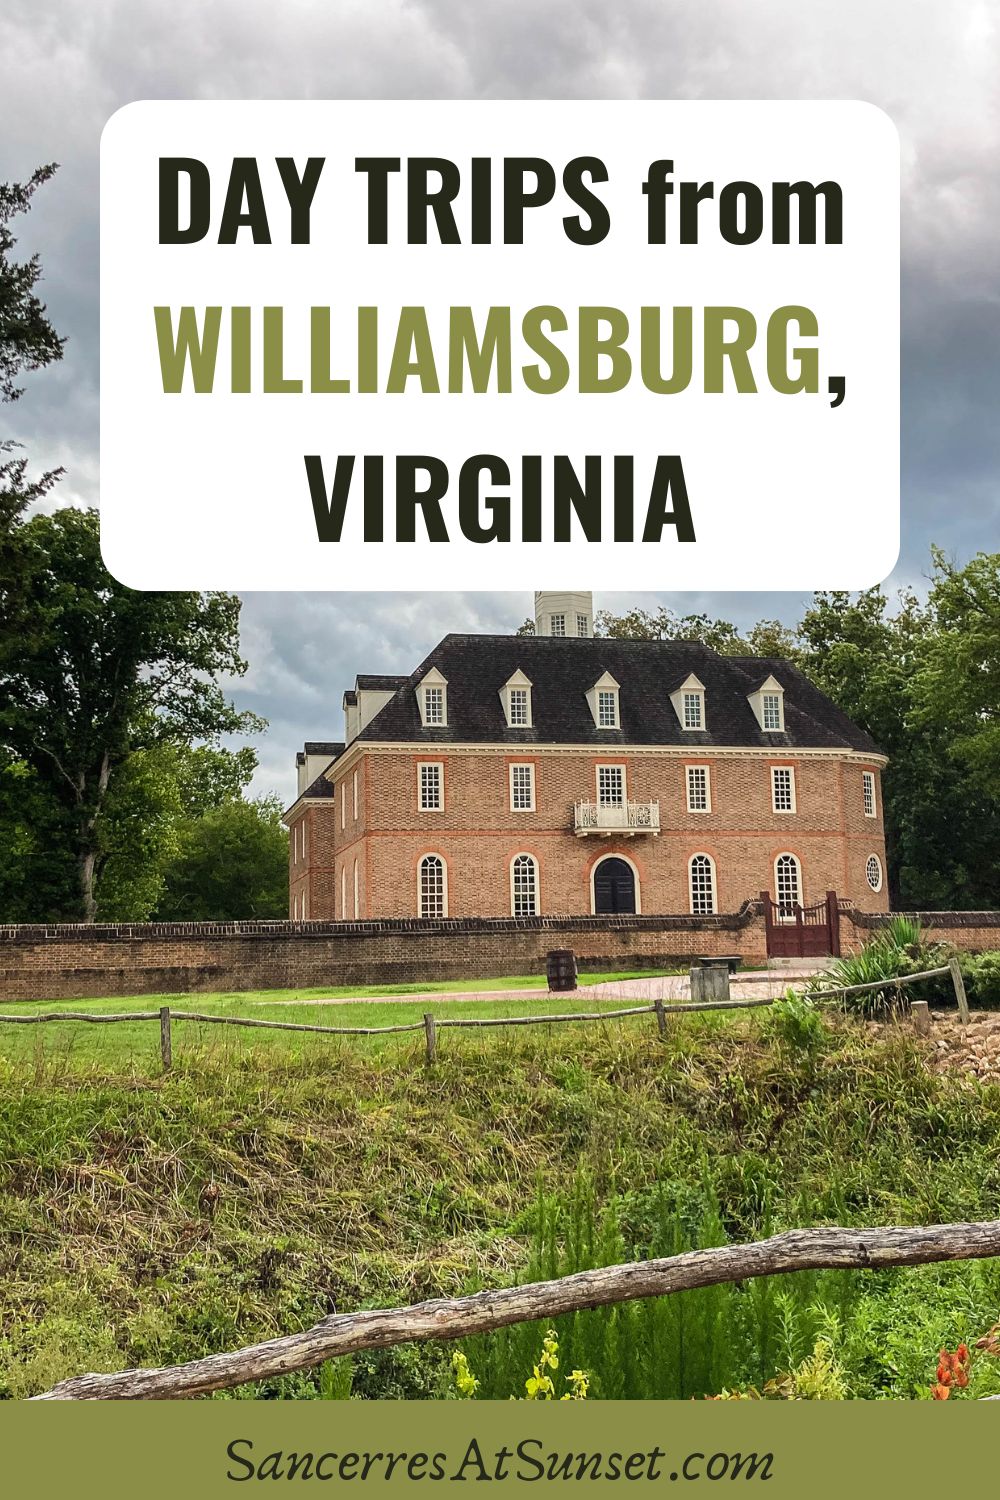 Day Trips from Williamsburg, Virginia